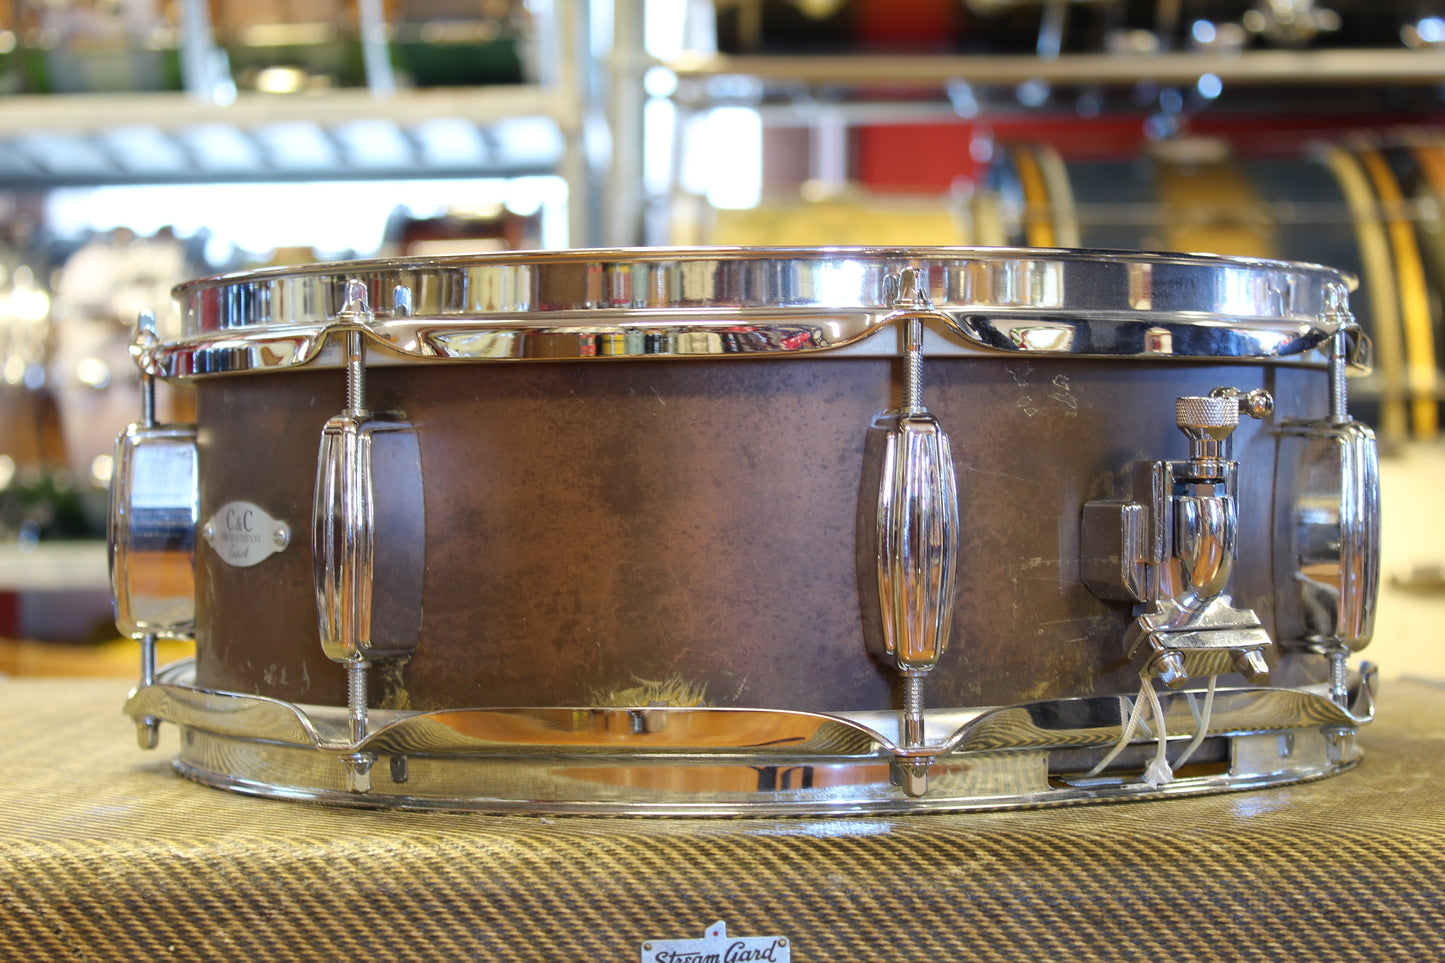 C&C Drum Company 5"x14" Dirty Copper over Steel